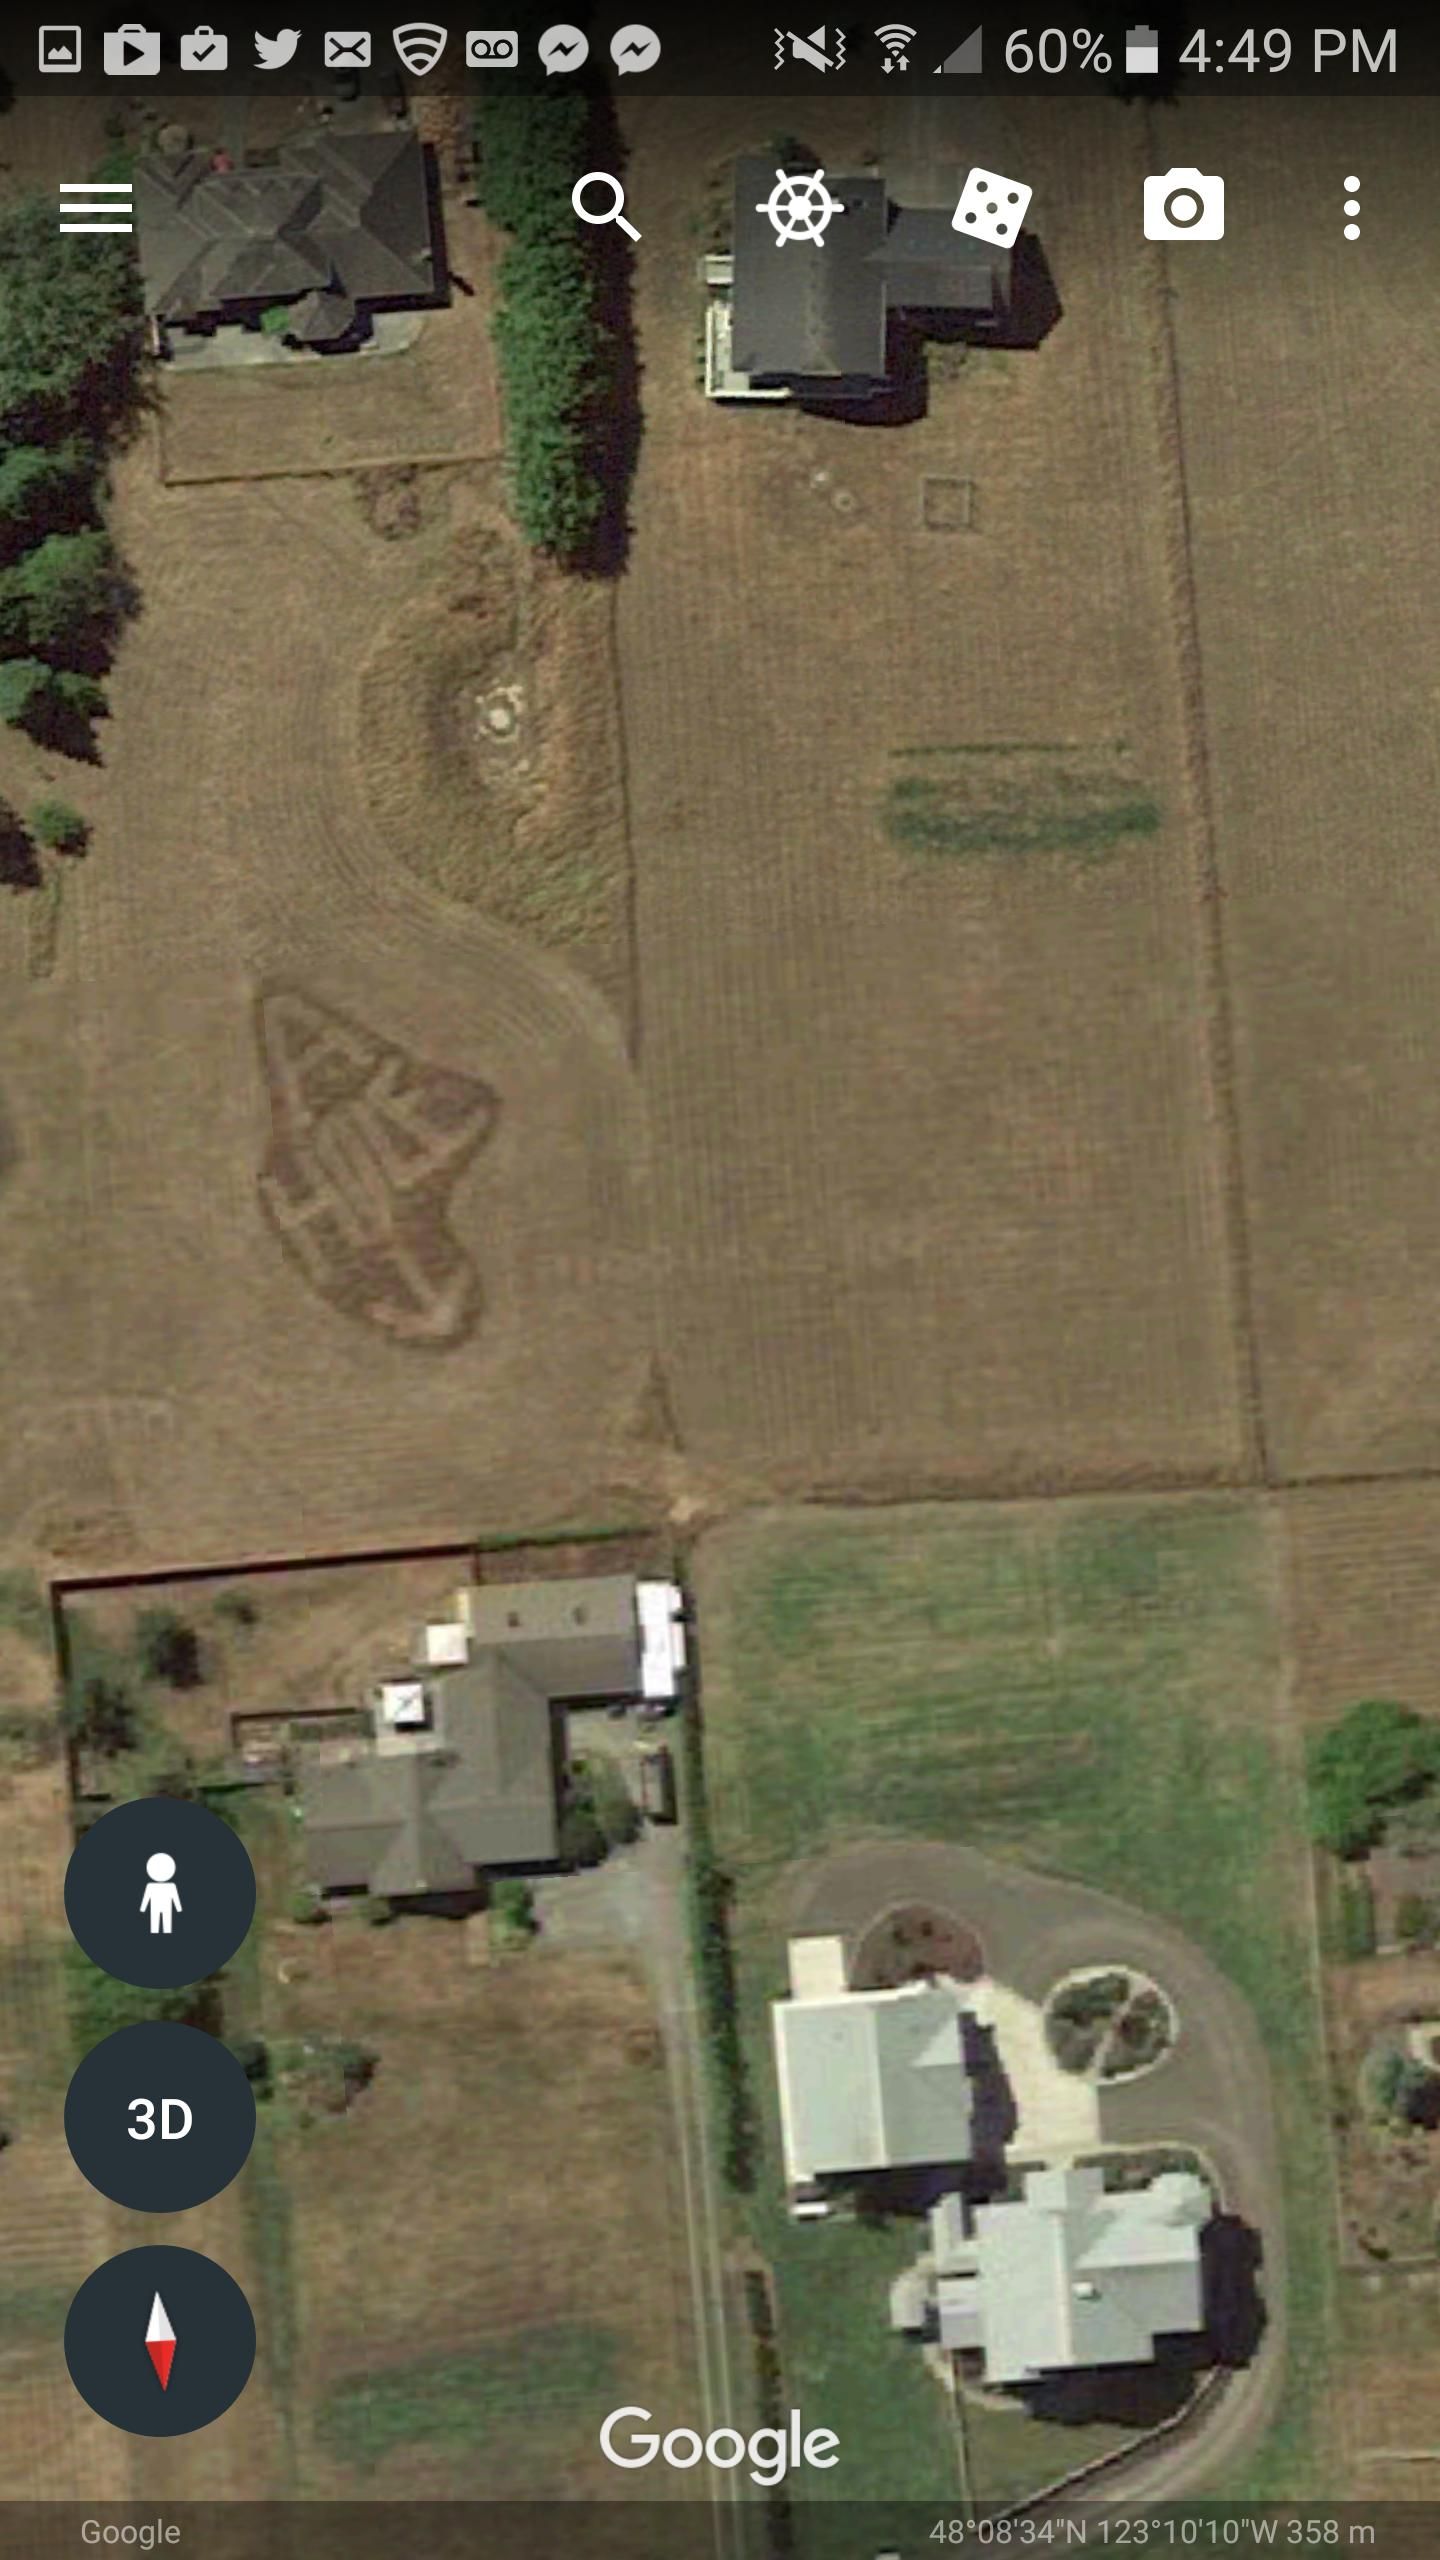 Found this while looking up my house on Google maps. Turns out my neighbors might not get along.